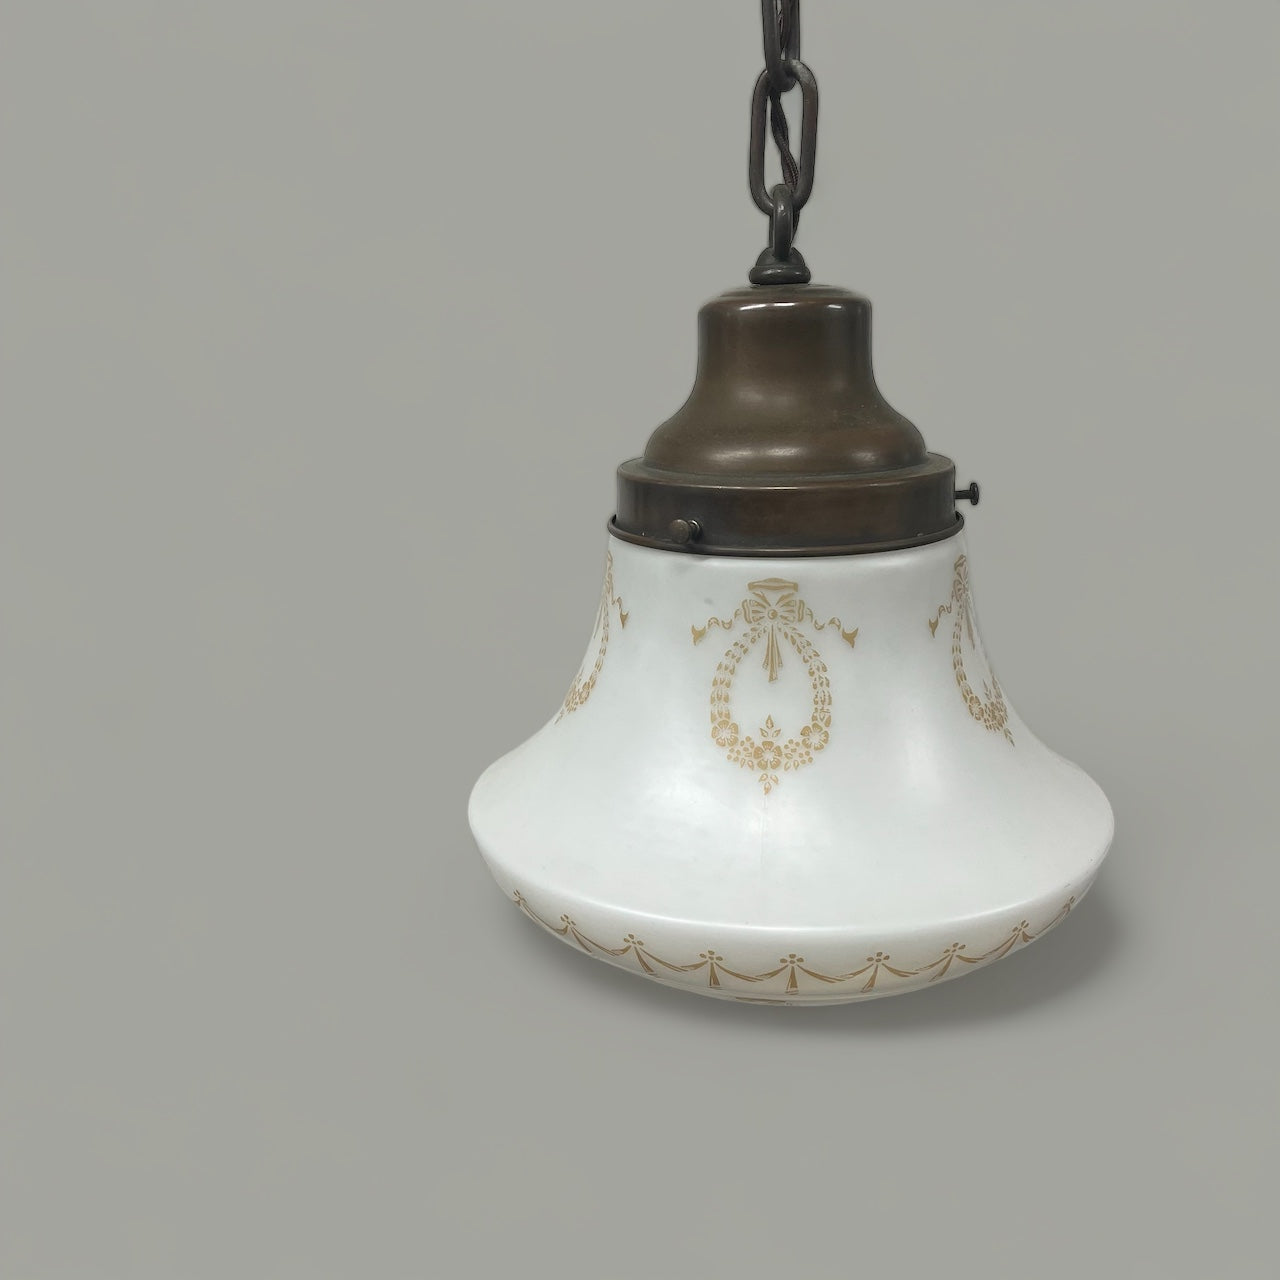 Antique Brass Pendant Light with Ornate Stenciled Glass Globe - Rewired